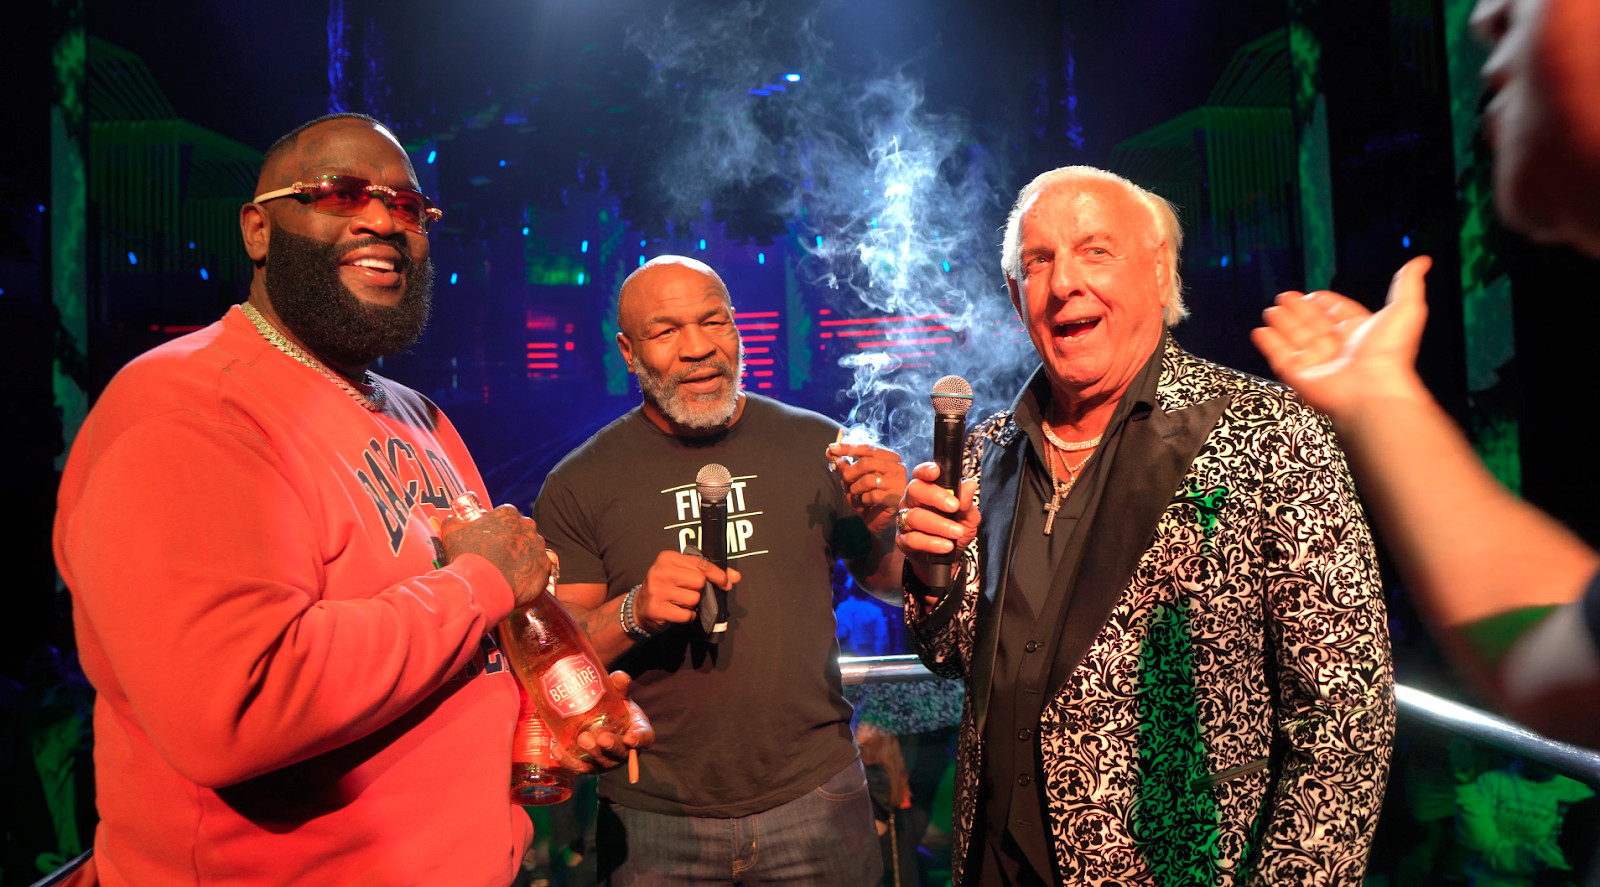 Uncensored: Benzinga Hosts Epic LIV Afterparty With Rick Ross, Ric Flair  And Mike Tyson